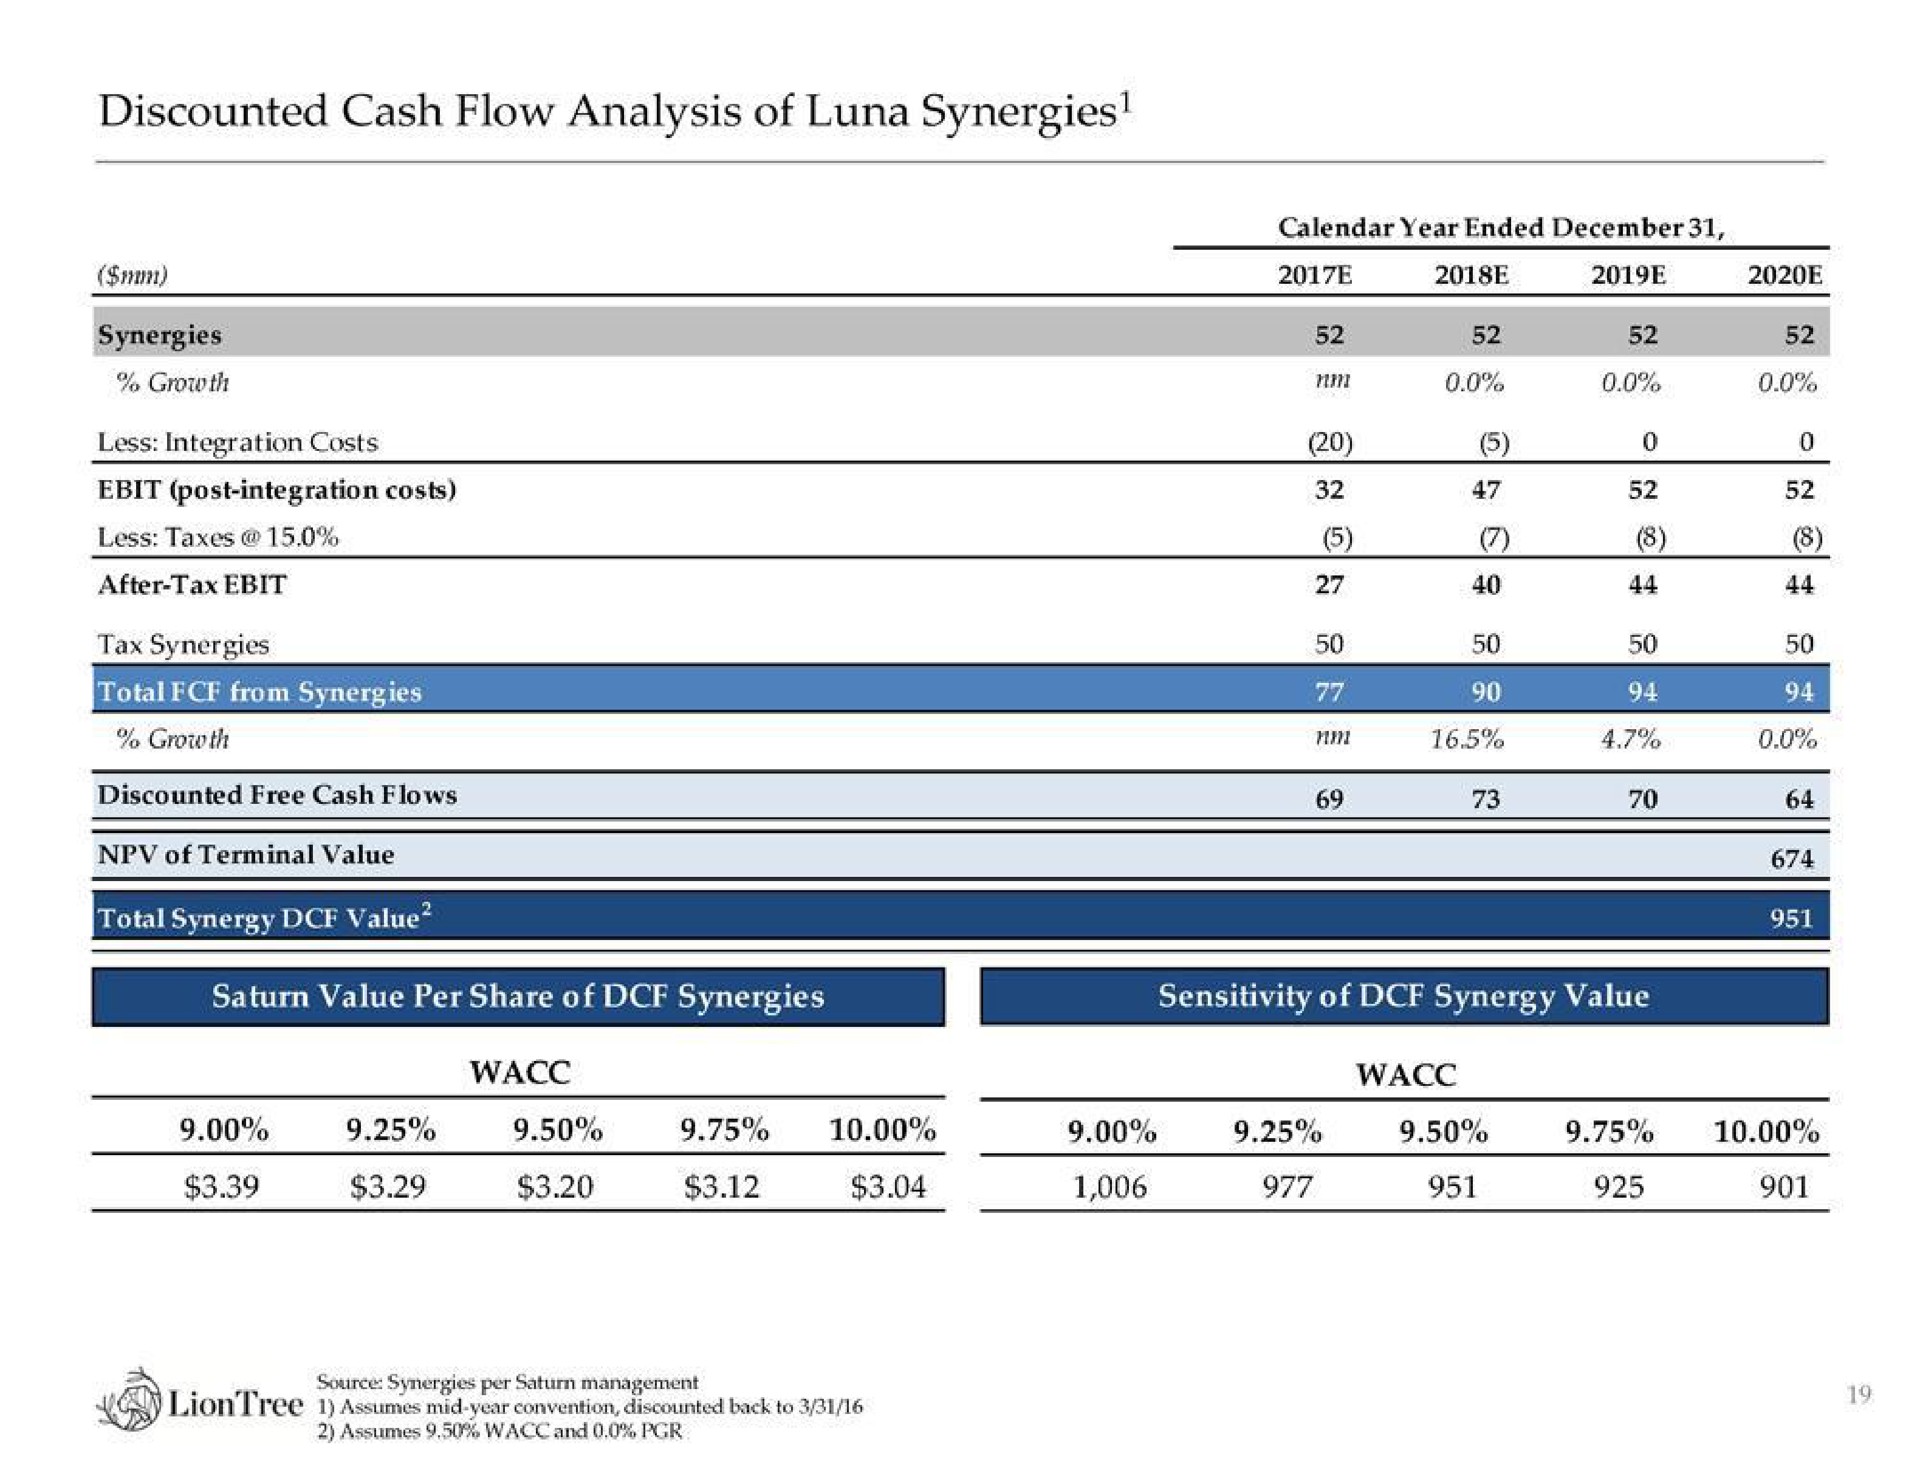 discounted cash flow analysis of luna synergies mere hele or coe value per share of synergies sec | LionTree